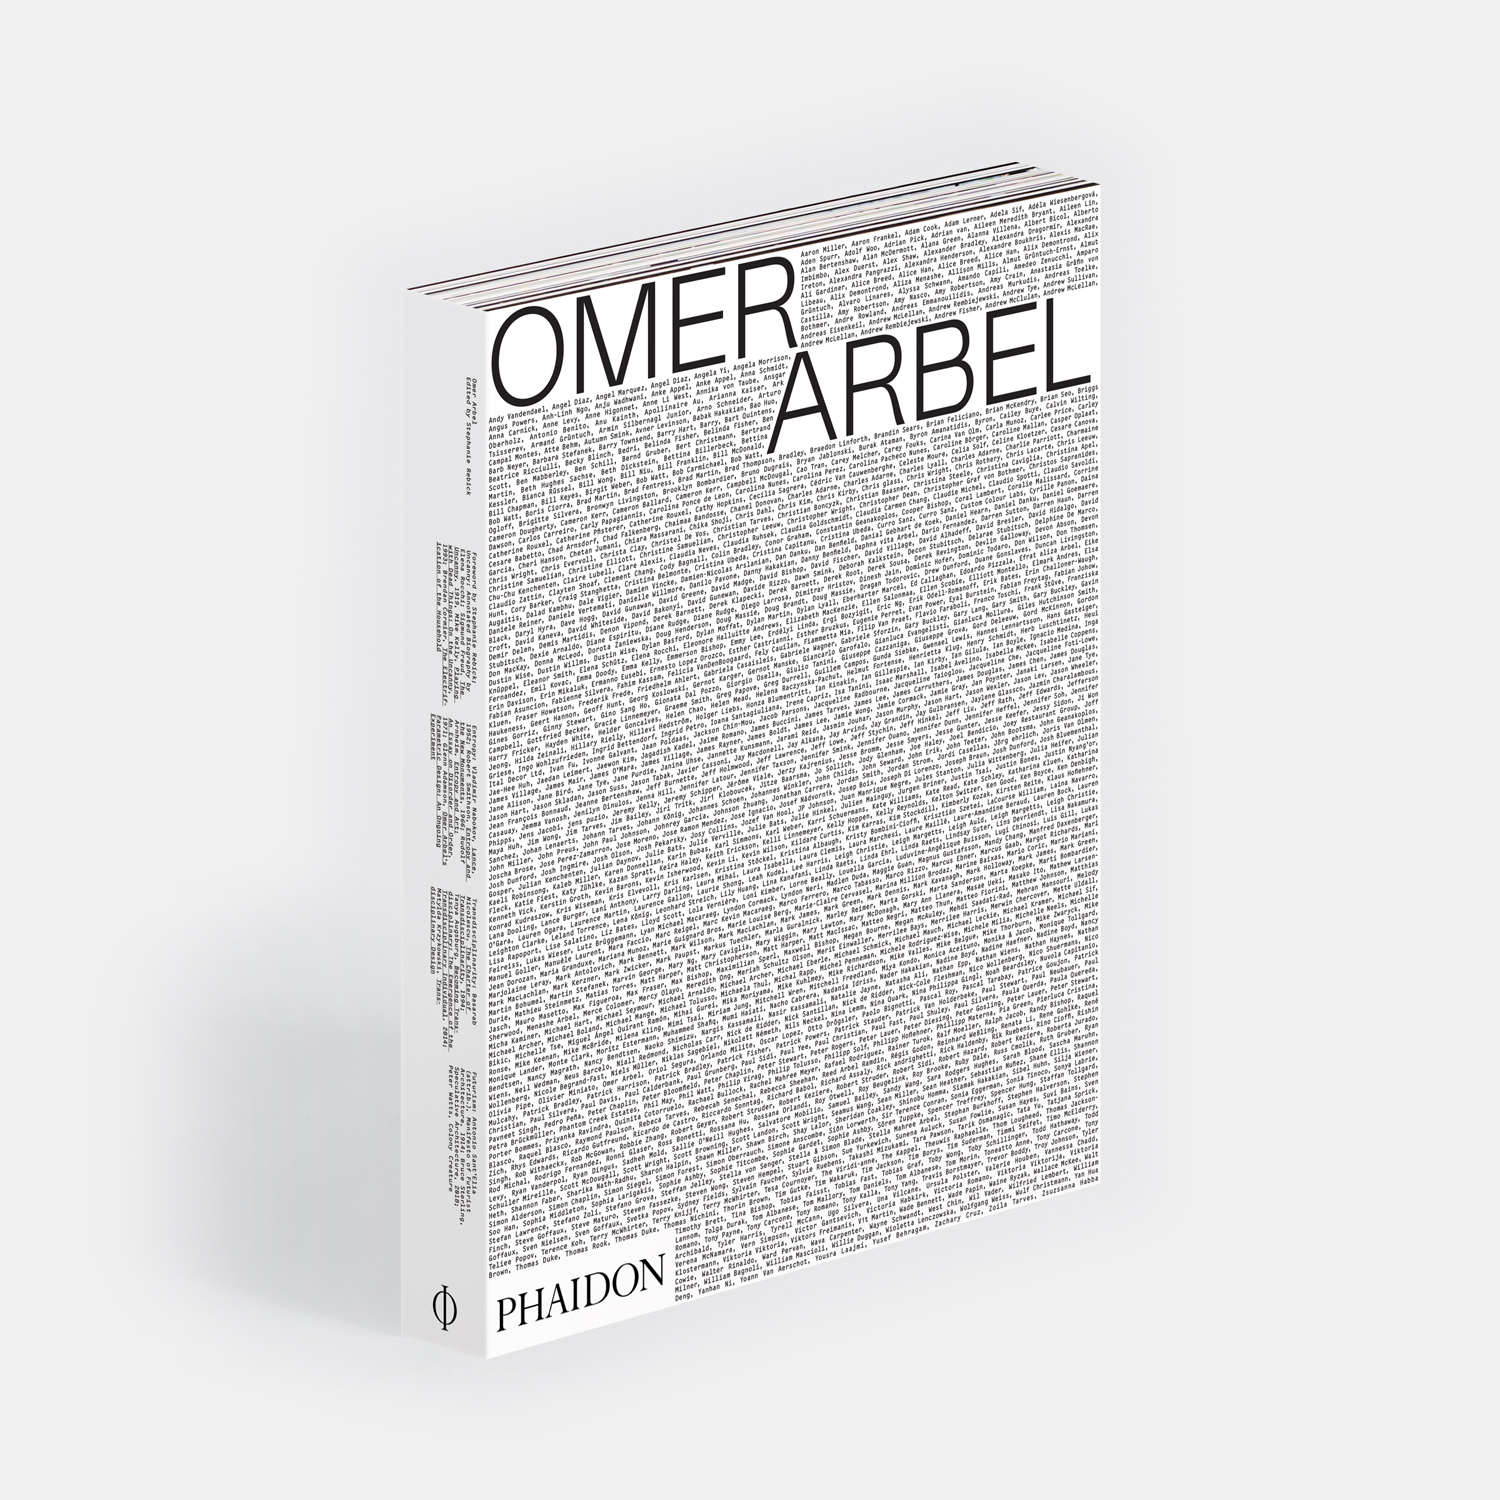 All you need to know about Omer Arbel